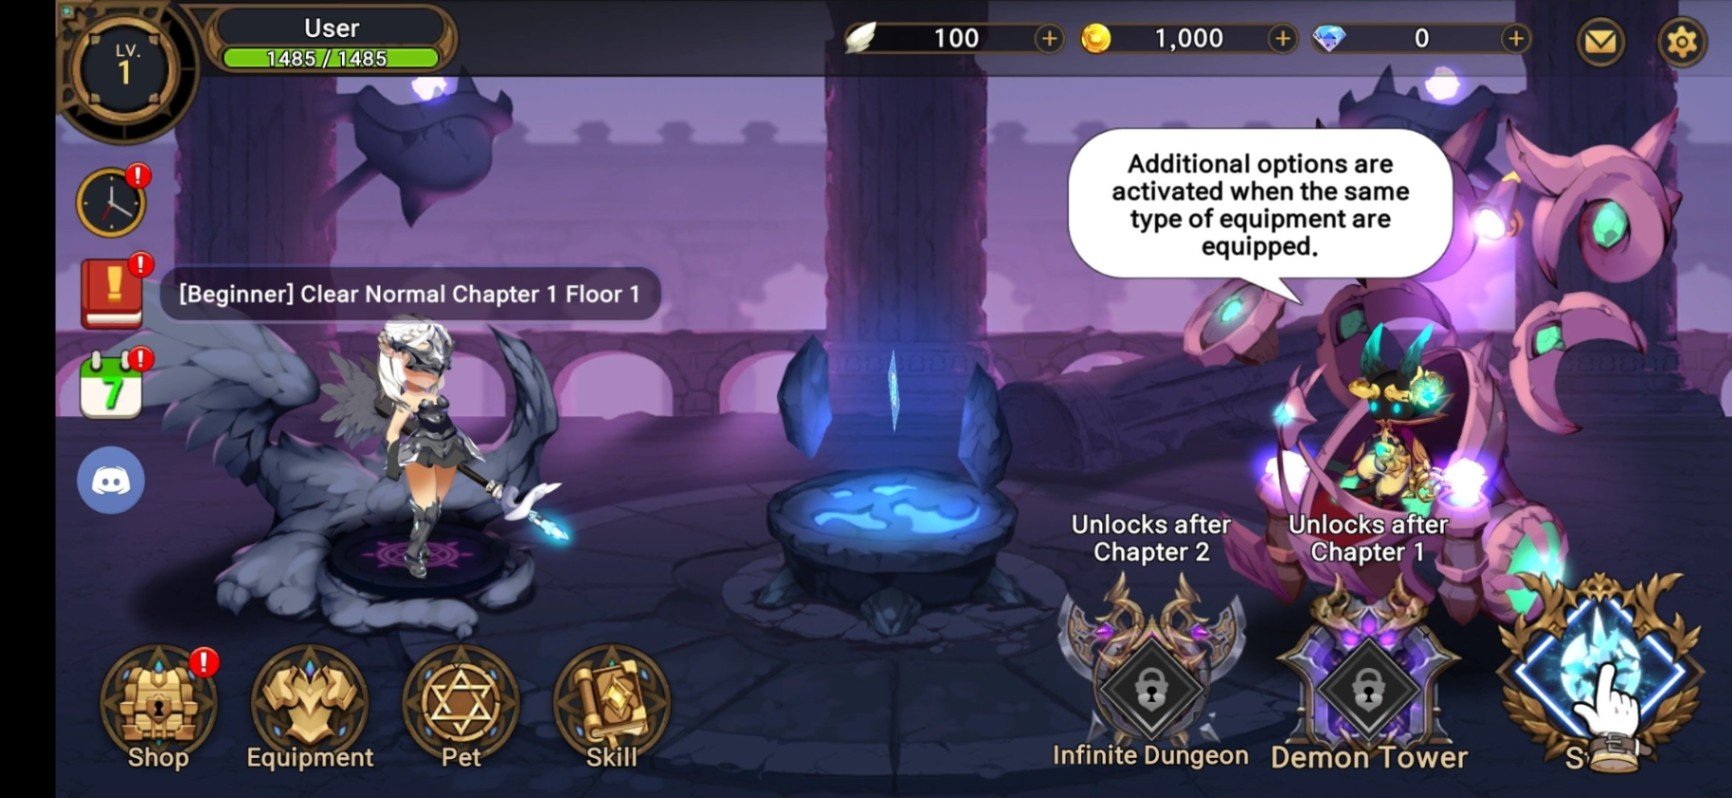 Angel Saga - Discover How To Get Coins